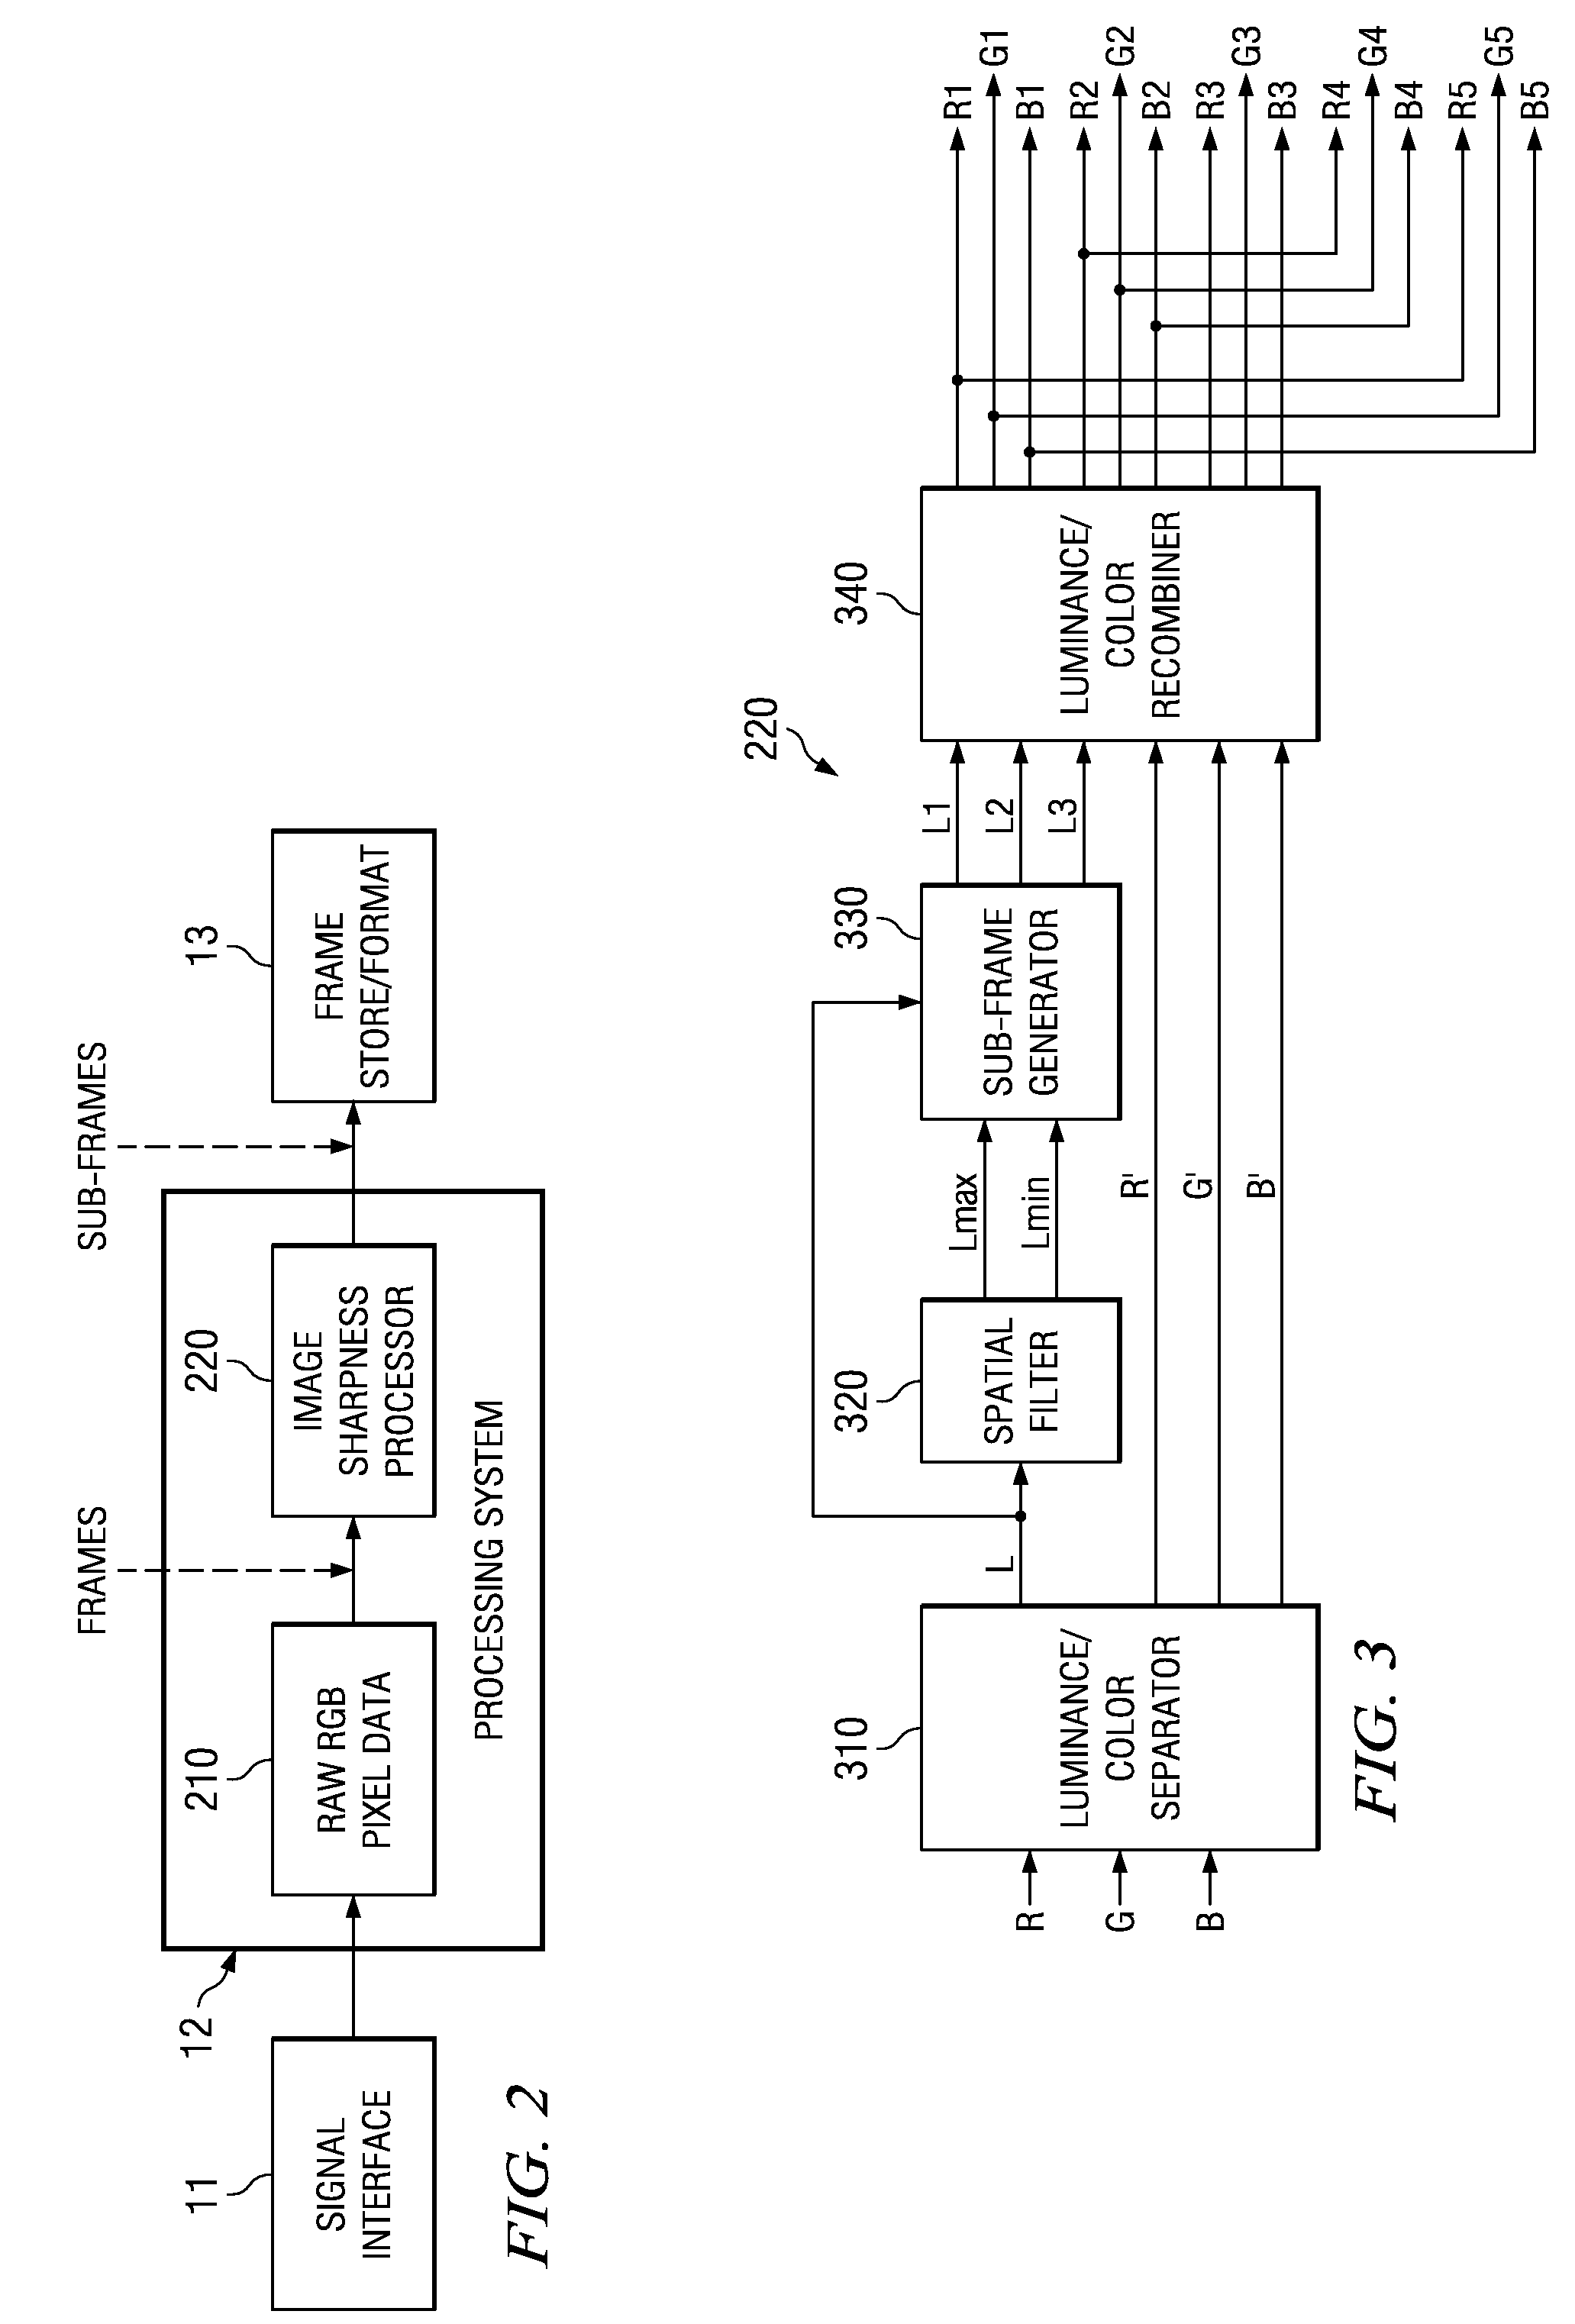 System and Method for Improving Video Image Sharpness